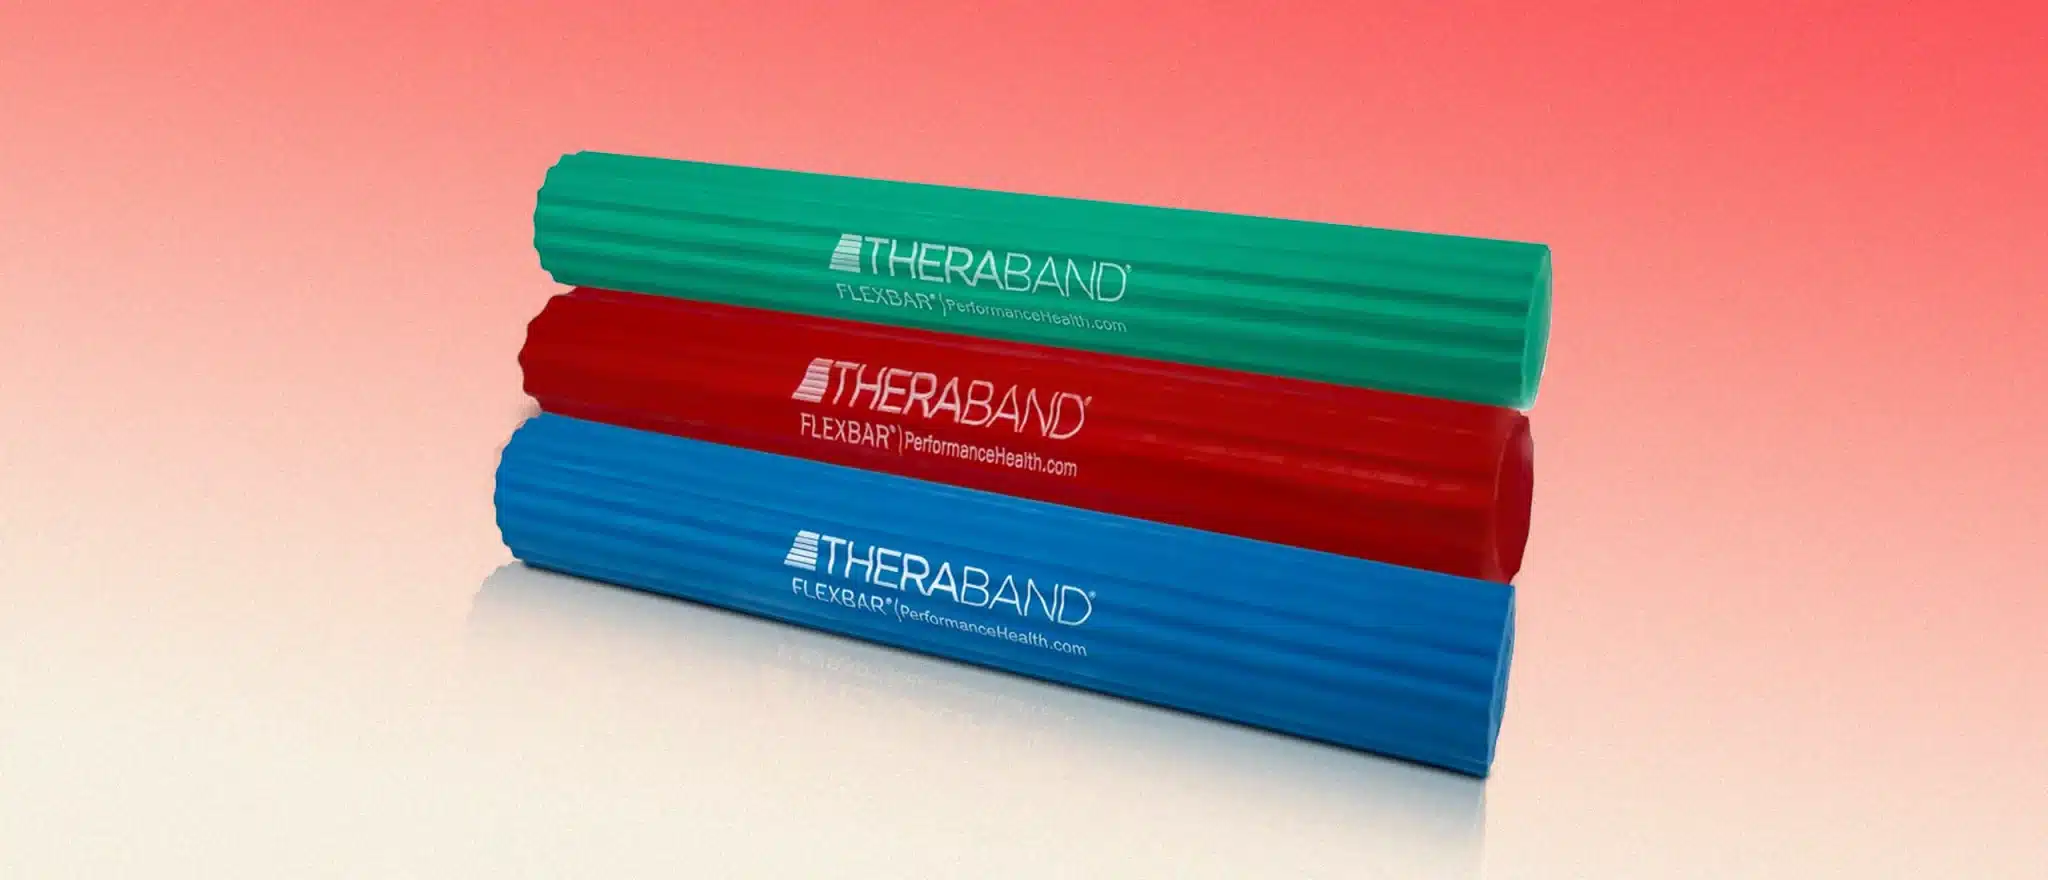 Play Golf or Tennis? The $15 Theraband FlexBar Can Save You a Lot of Pain